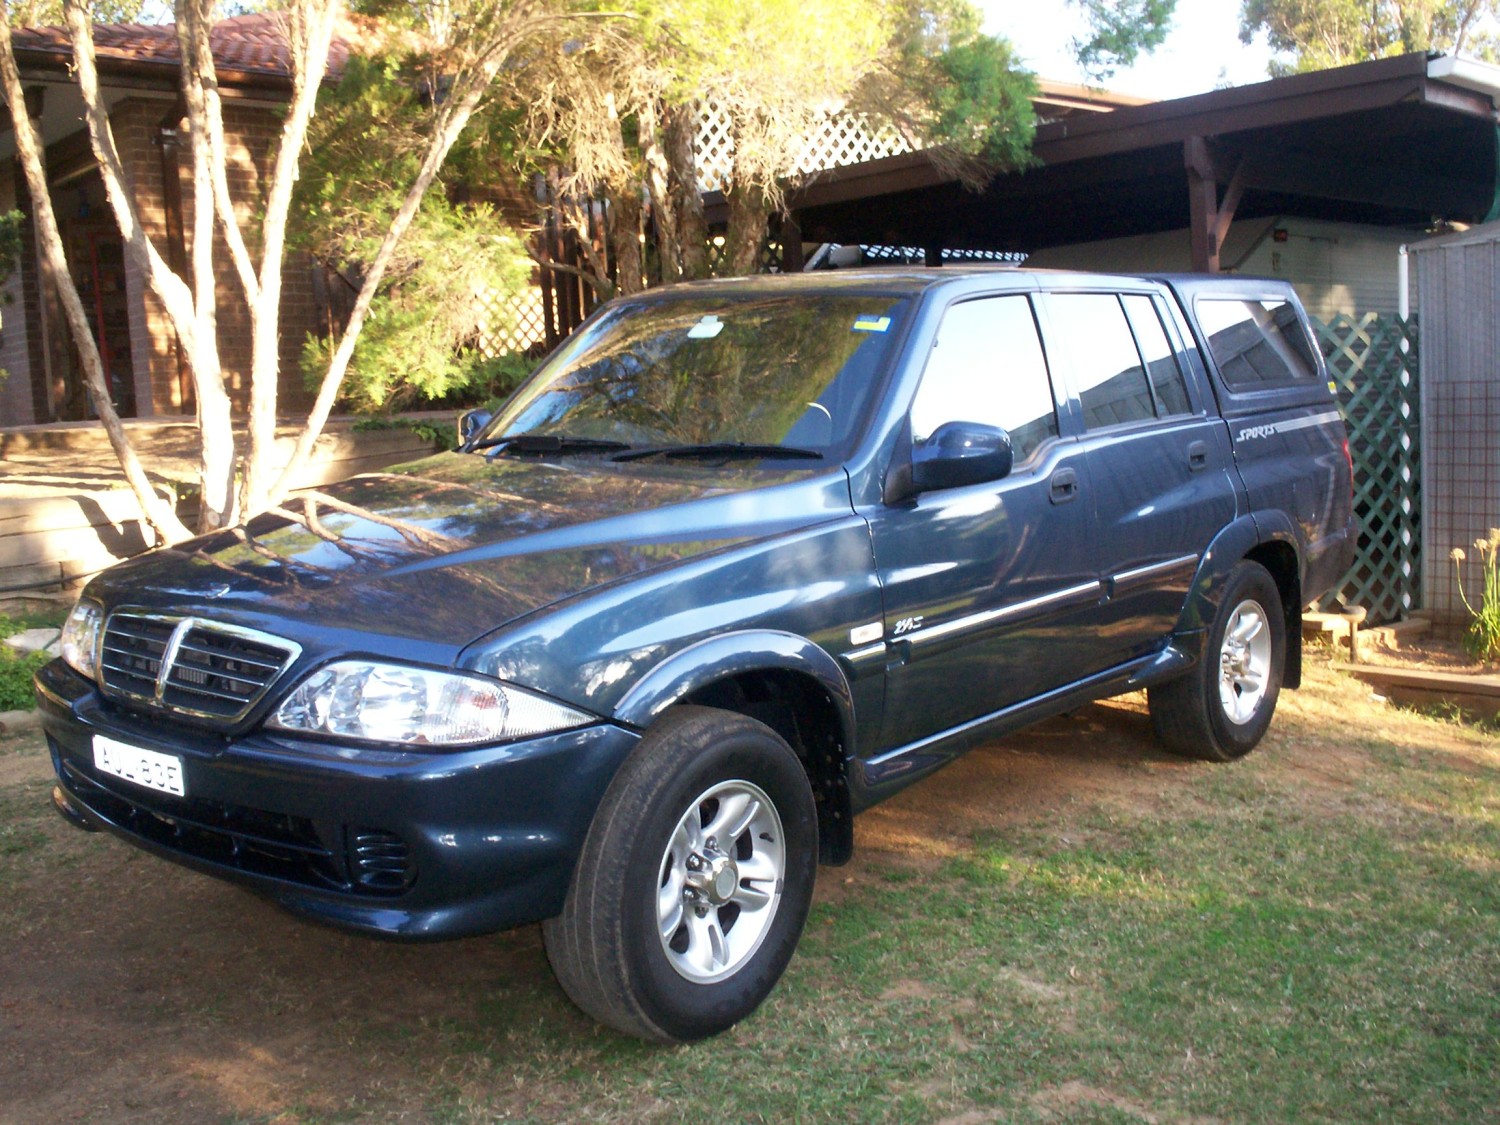 2005 Ssangyong Musso Sports - Dynaman - Shannons Club